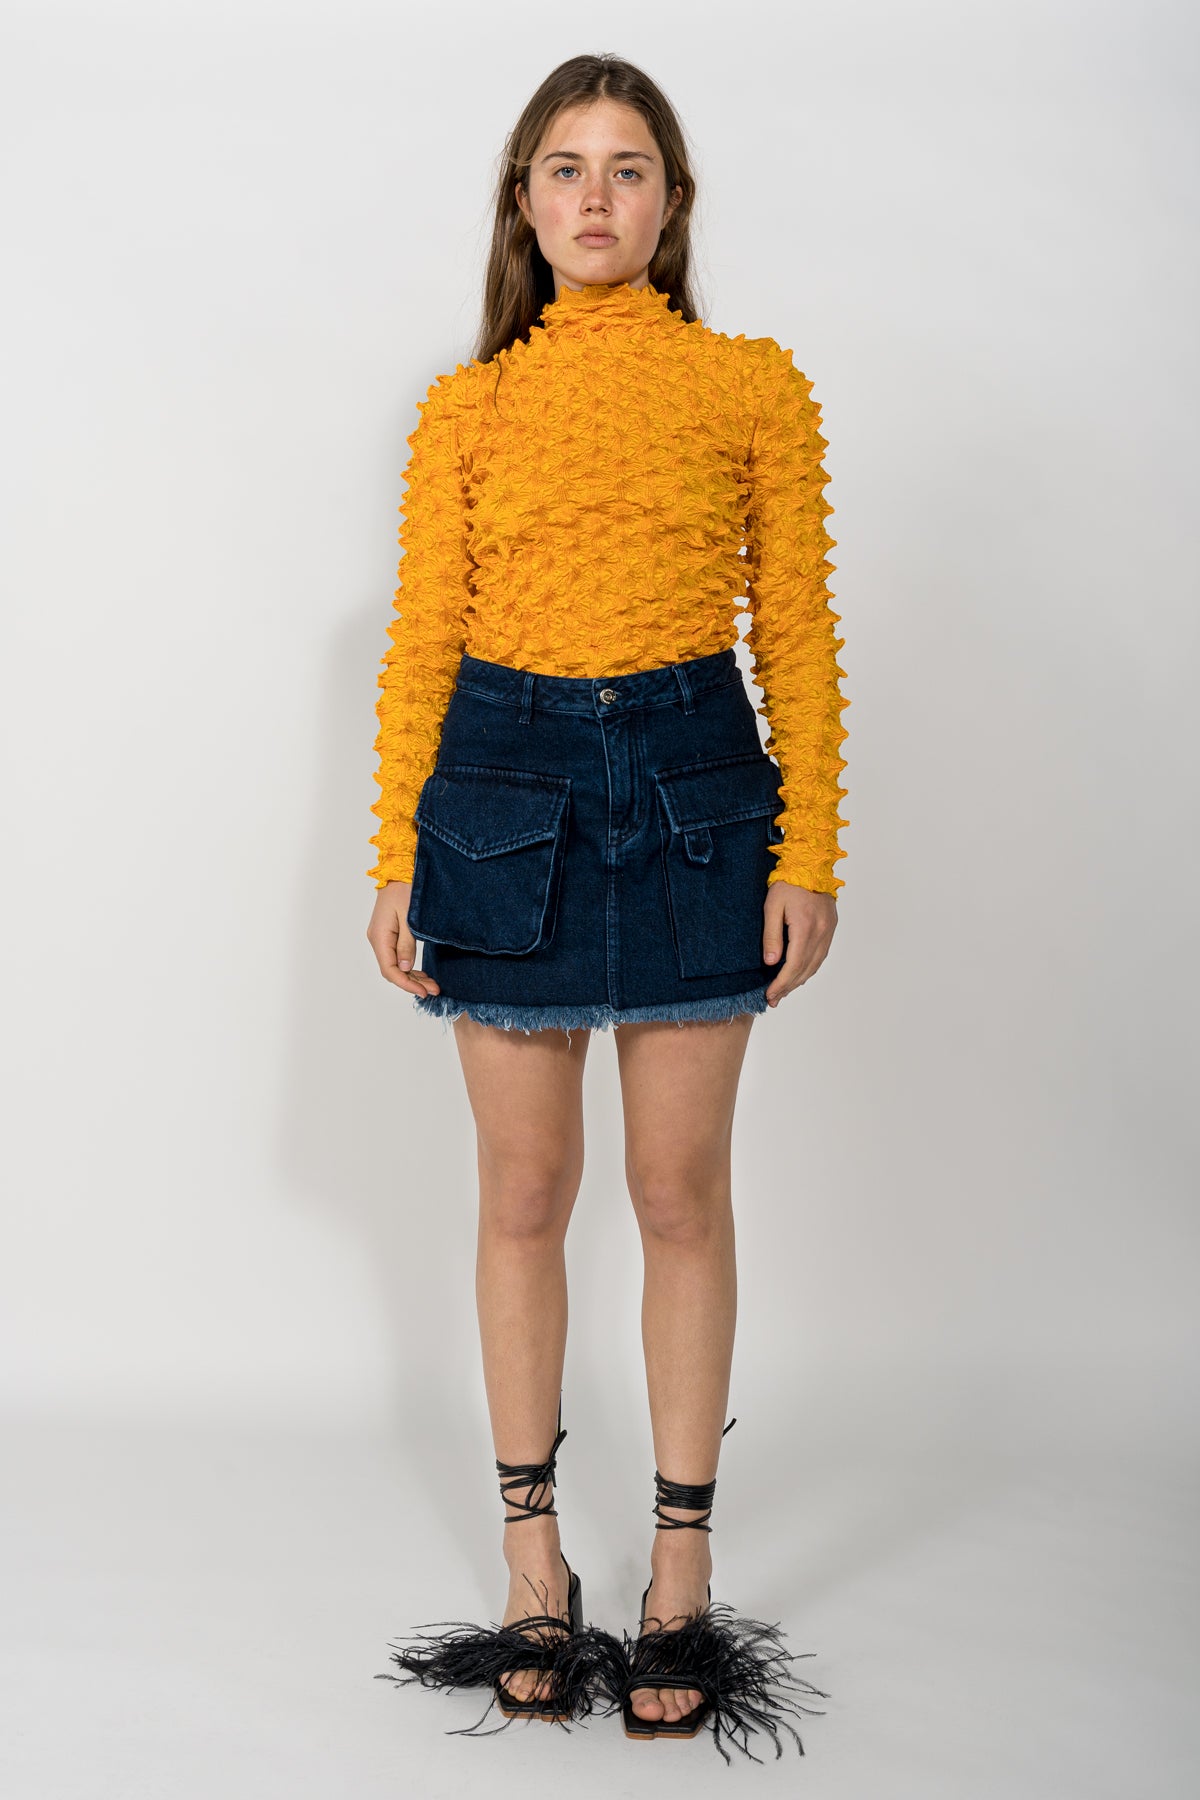 PATCH POCKET MINI SKIRT IN NAVY MARQUES ALMEIDA